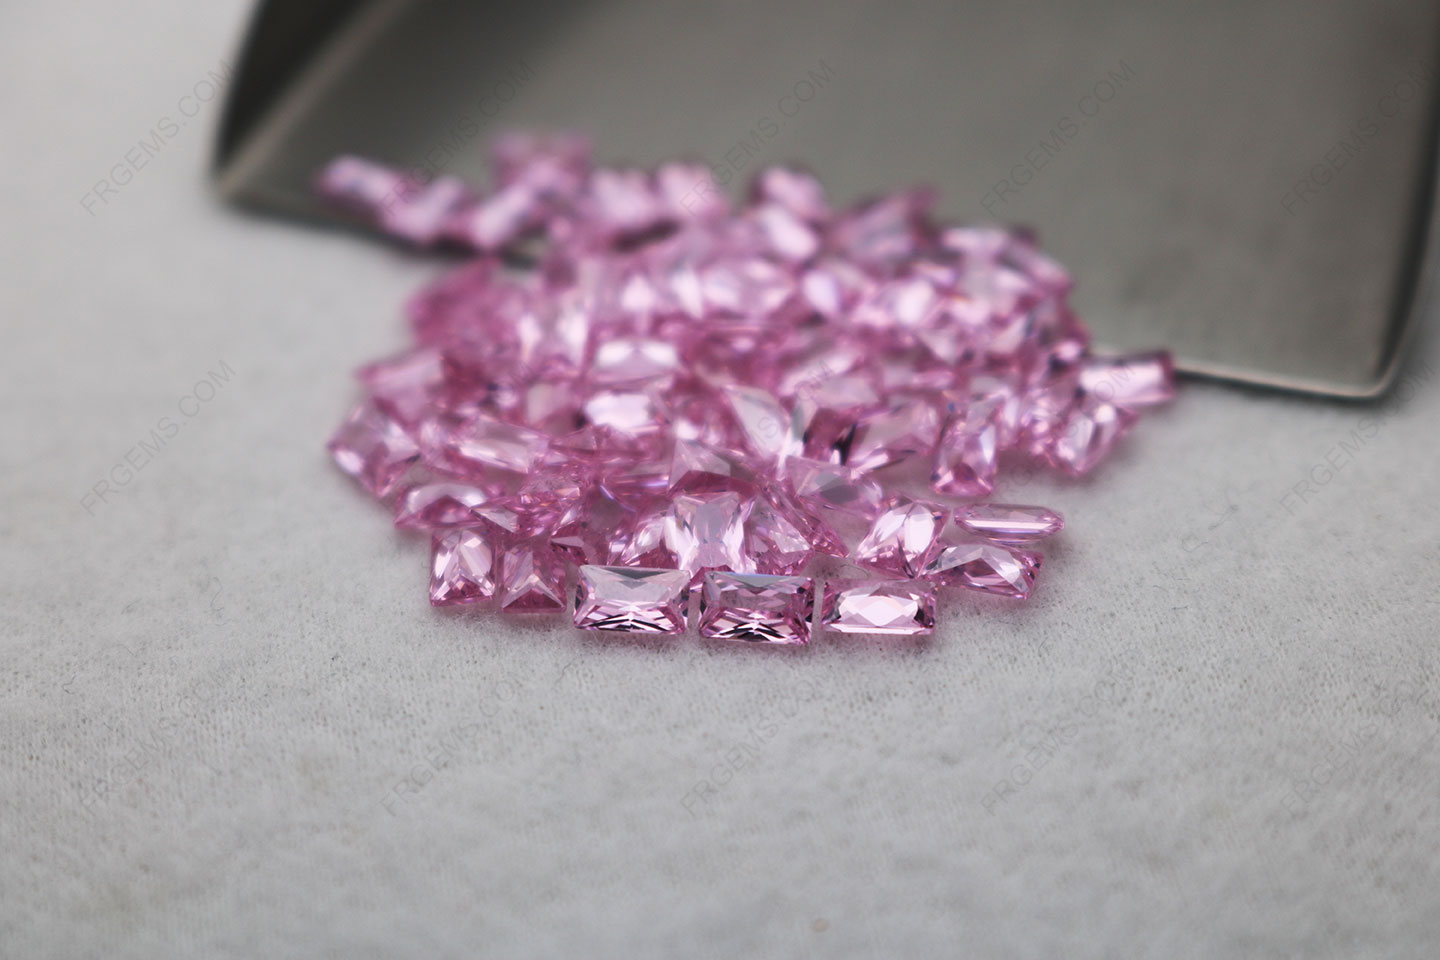 Rectangle shape princess faceted cut birthstone loose Cubic Zirconia Pink color gemstones IMG_5254